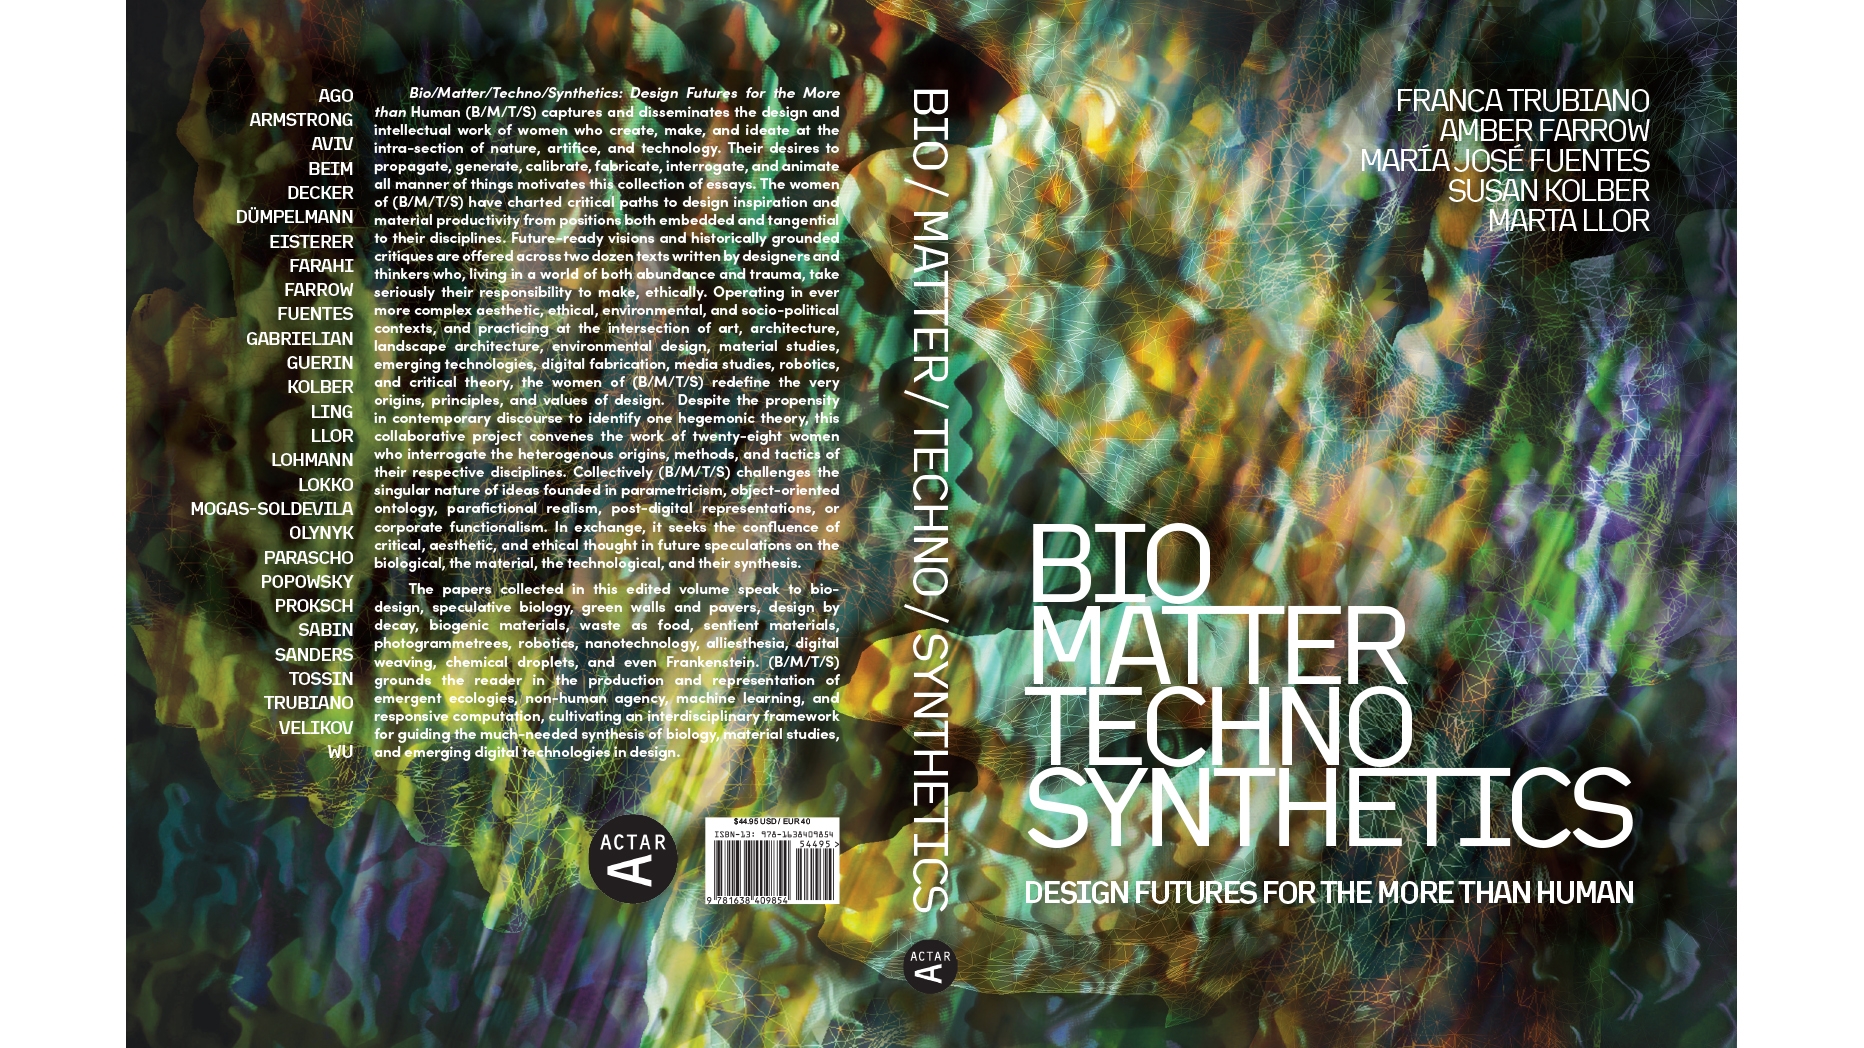 Book Cover of BIO/MATTER/TECHNO/SYNTHETICS: Design Futures for the More than Humanhttps://www.design.upenn.edu/people/dr-franca-trubiano